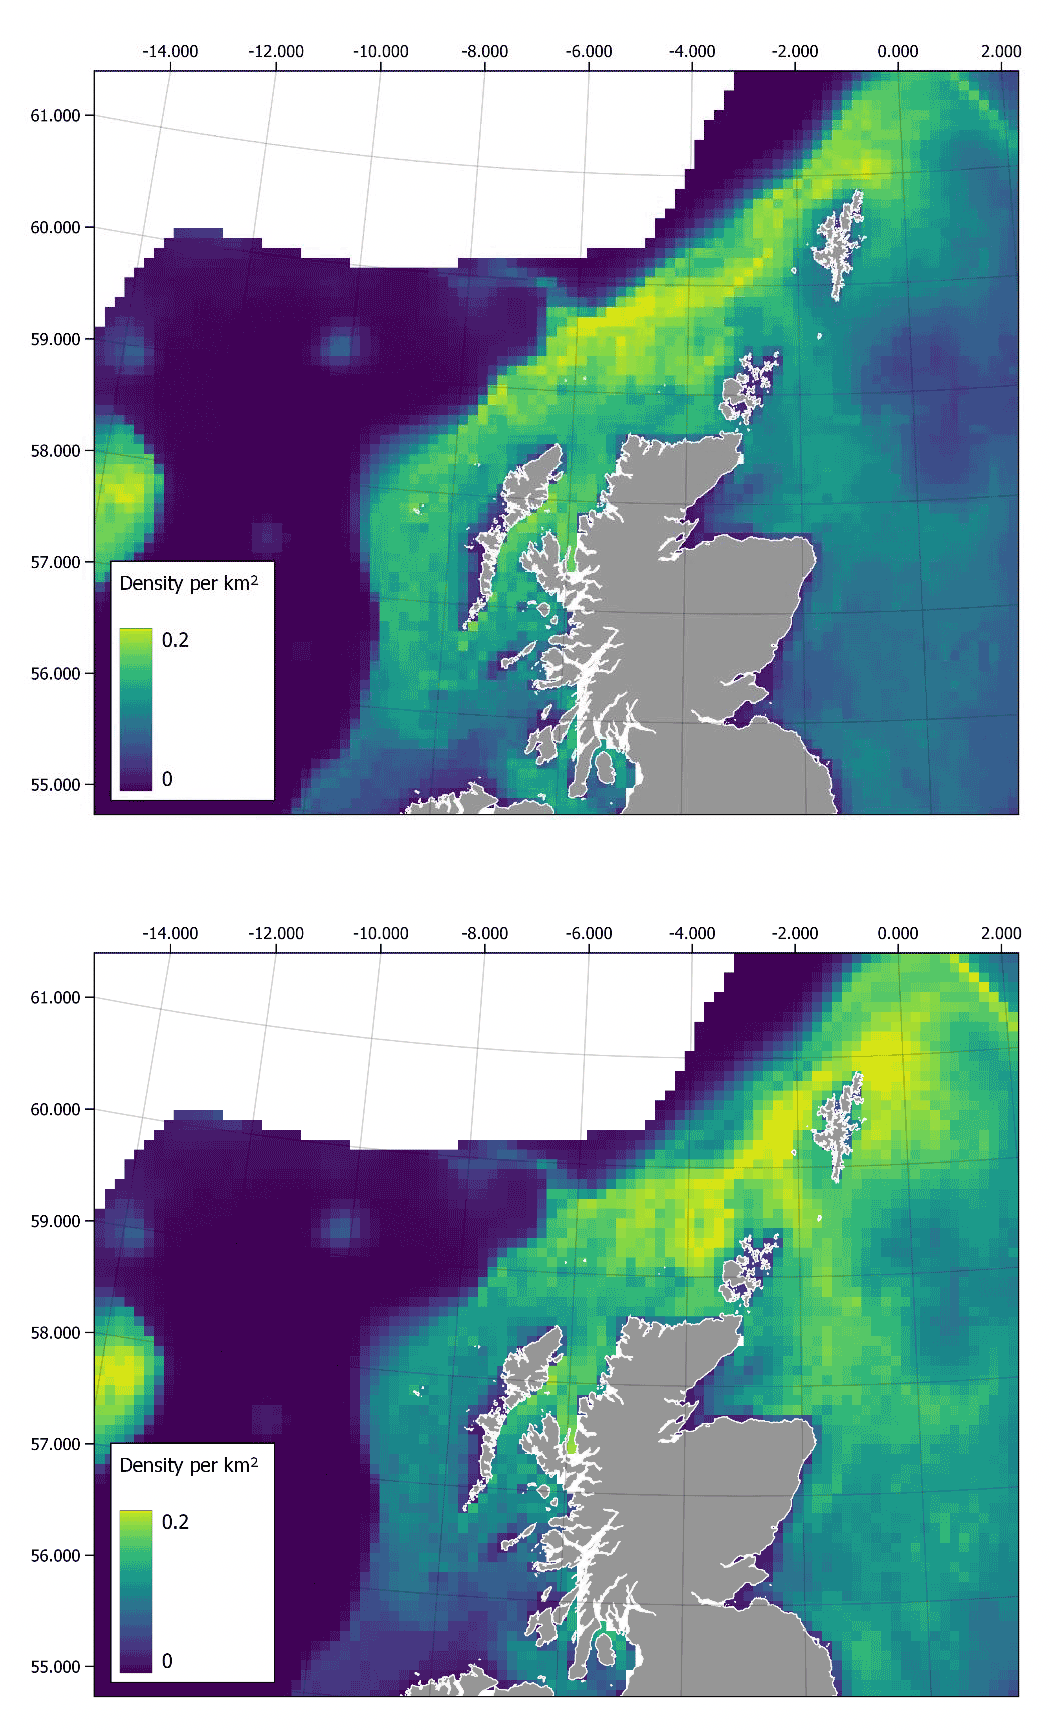 Two maps of Scotland showing predicted white beaked dolphin densities in January and July. Densities are highest in the north sea region immediately east of Aberdeenshire and Moray, and along frontal features west of the outer Hebrides. Densities are somewhat comparable between seasons with a slight increase in July when compared with January.